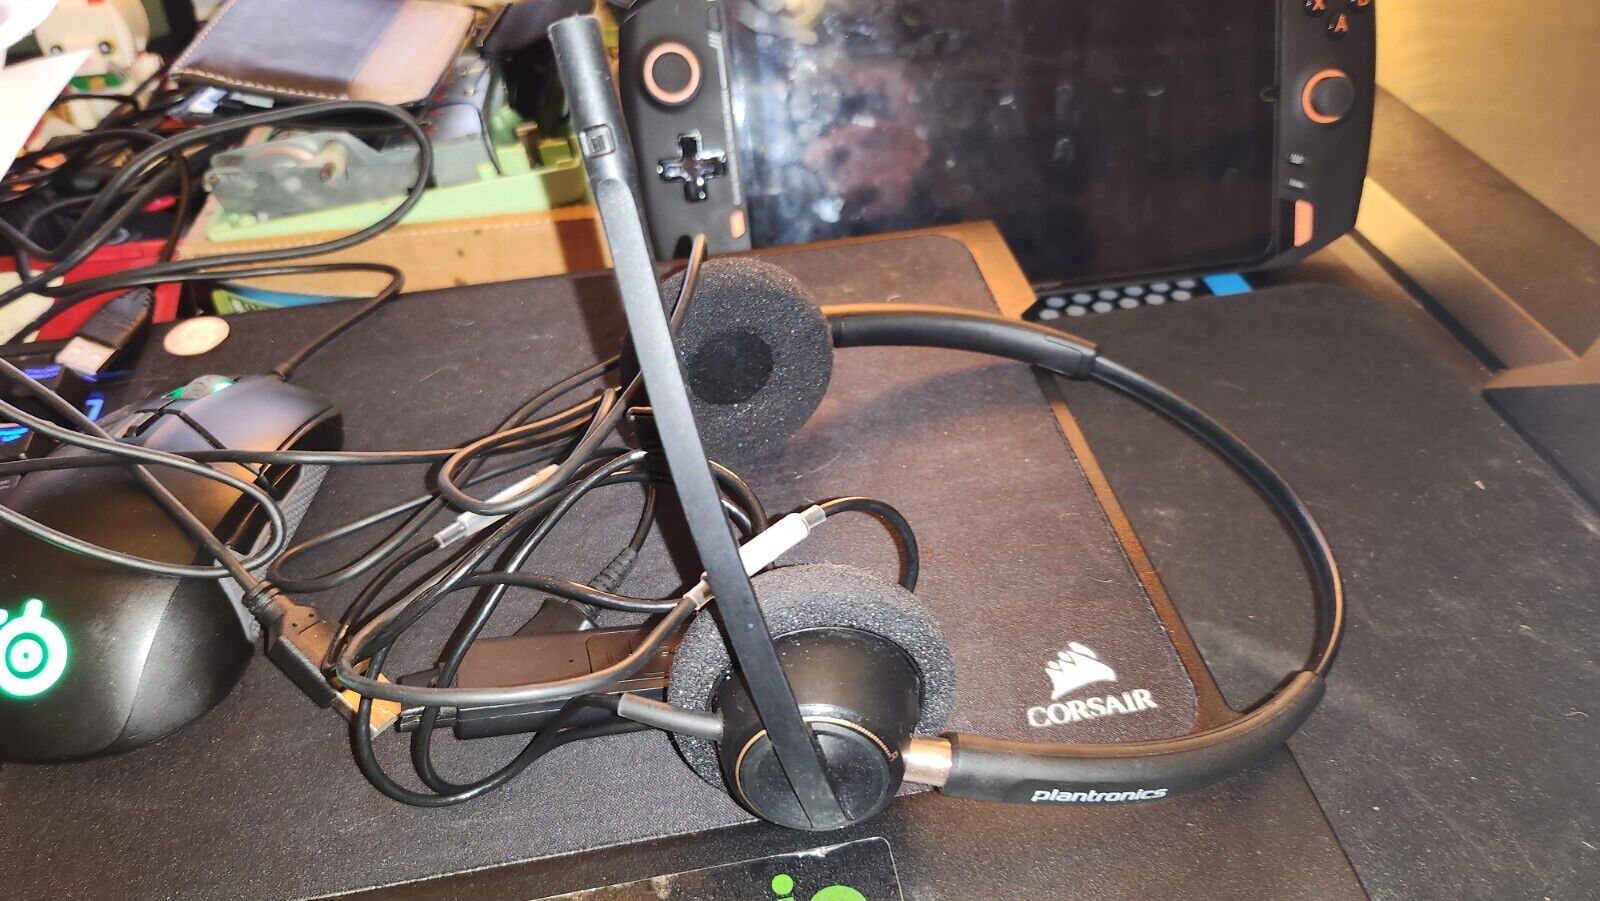 Plantronics Headset And Microphone